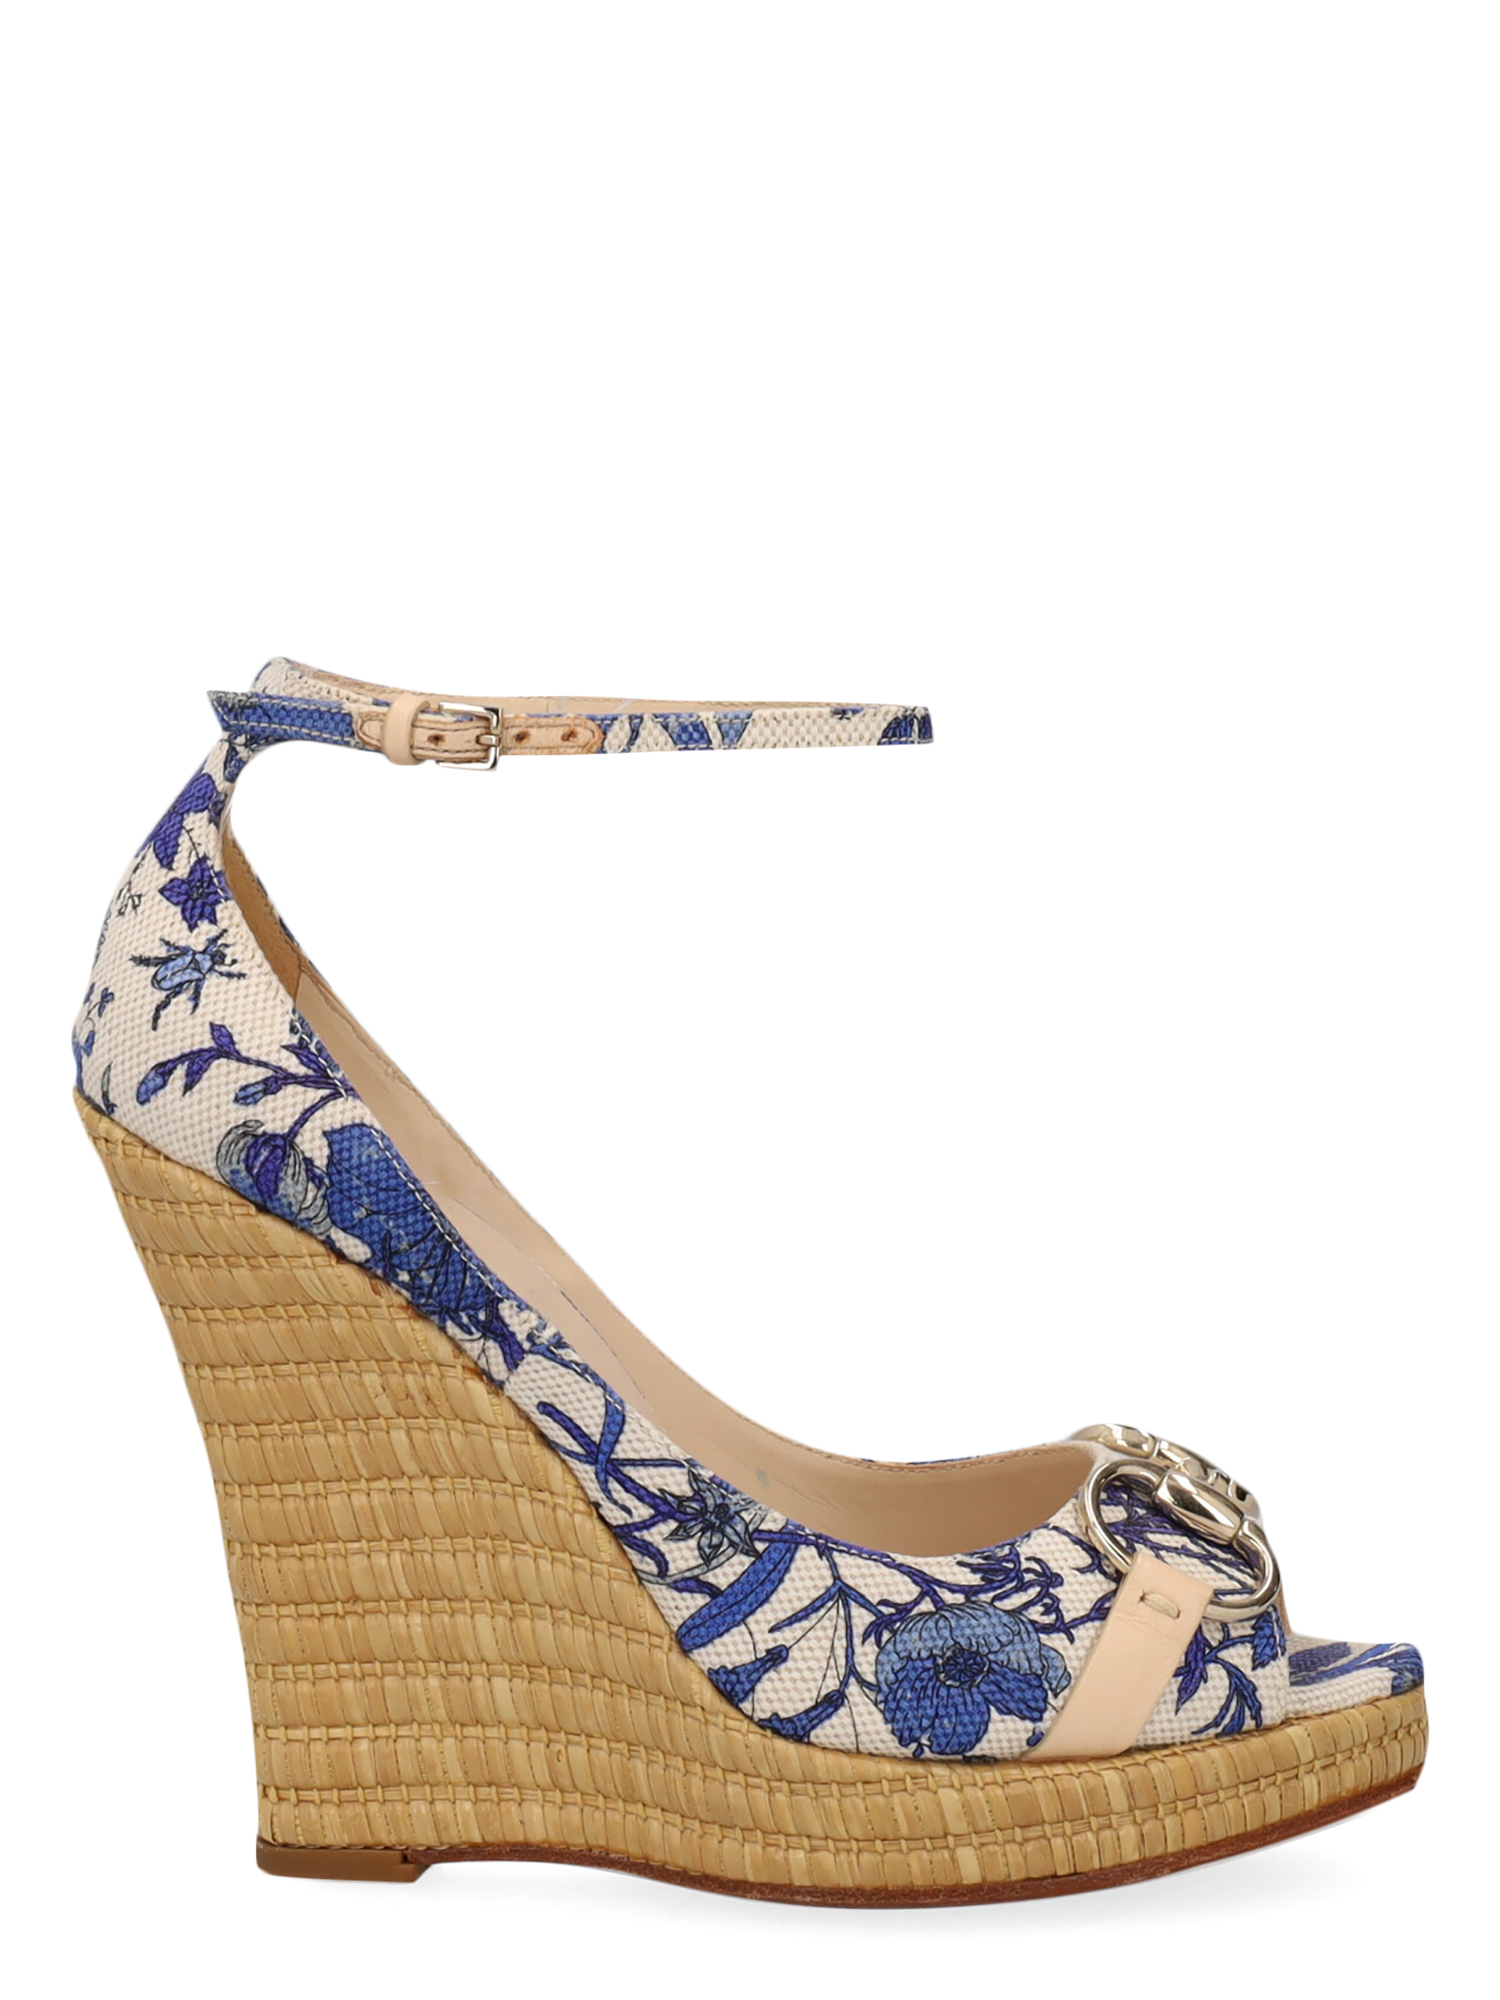 Pre-owned Gucci Women's Wedges -  - In Navy, White Fabric